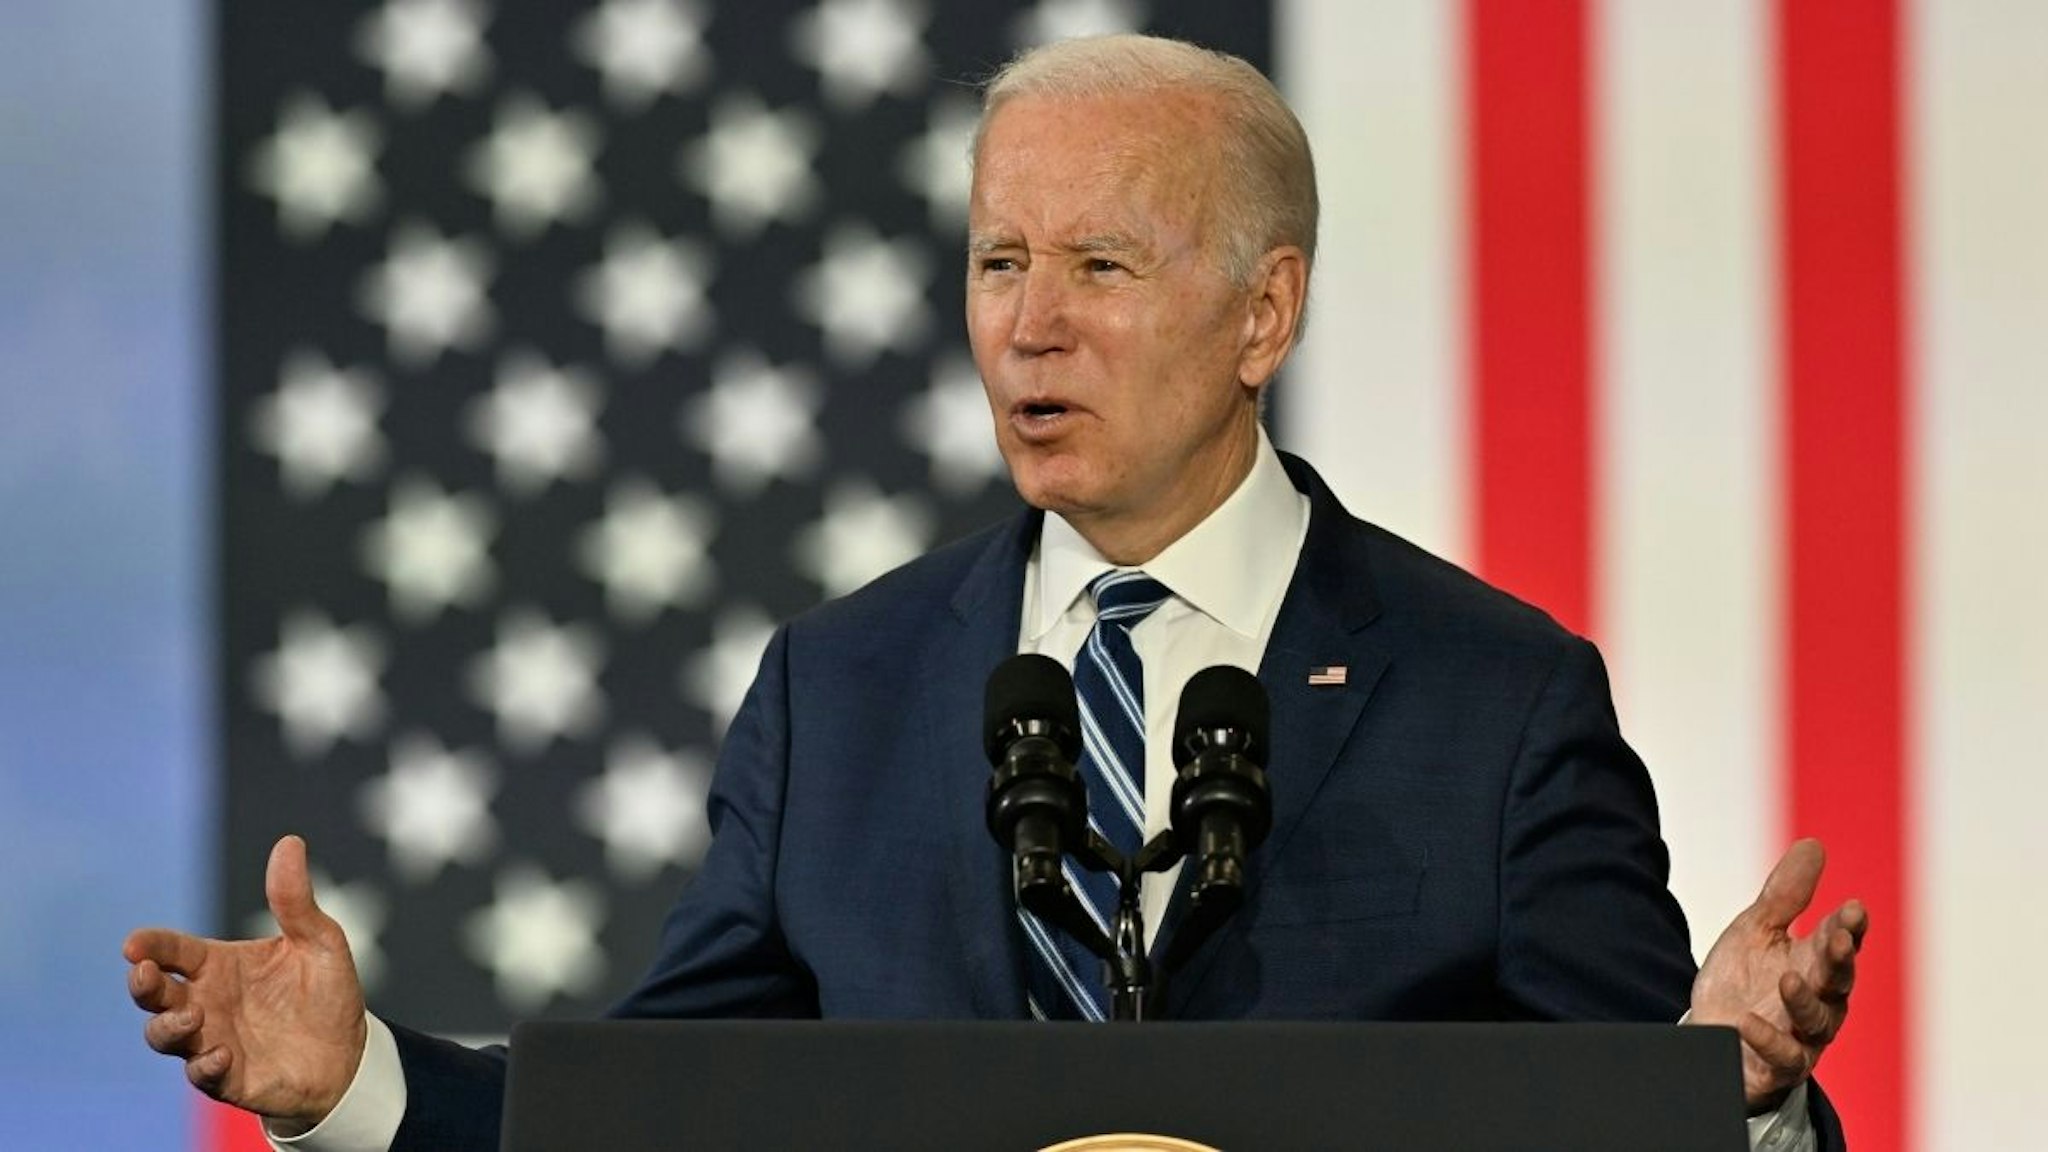 US President Joe Biden delivering remarks on his Administrationâs efforts to make more in America, rebuild our supply chains here at home, and bring down costs for the American people as part of Building a Better America in Greensboro, NC, on April 14, 2022.